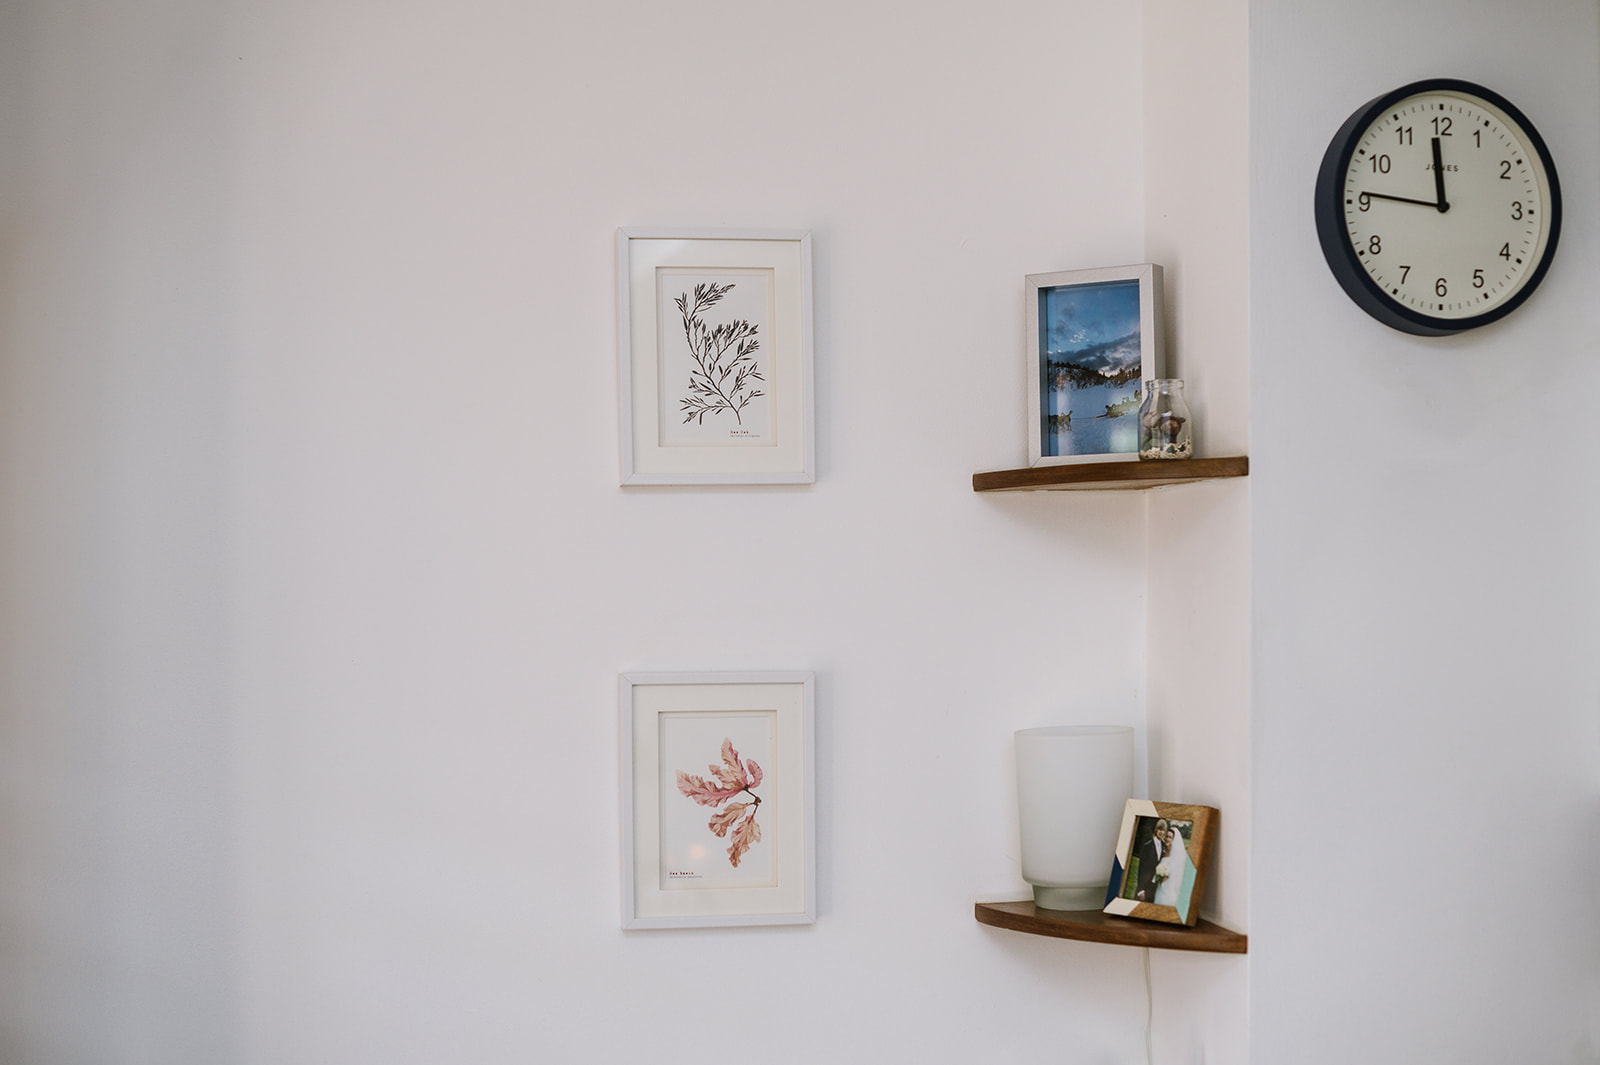 pictures, shelves and a clock hanging on the wall